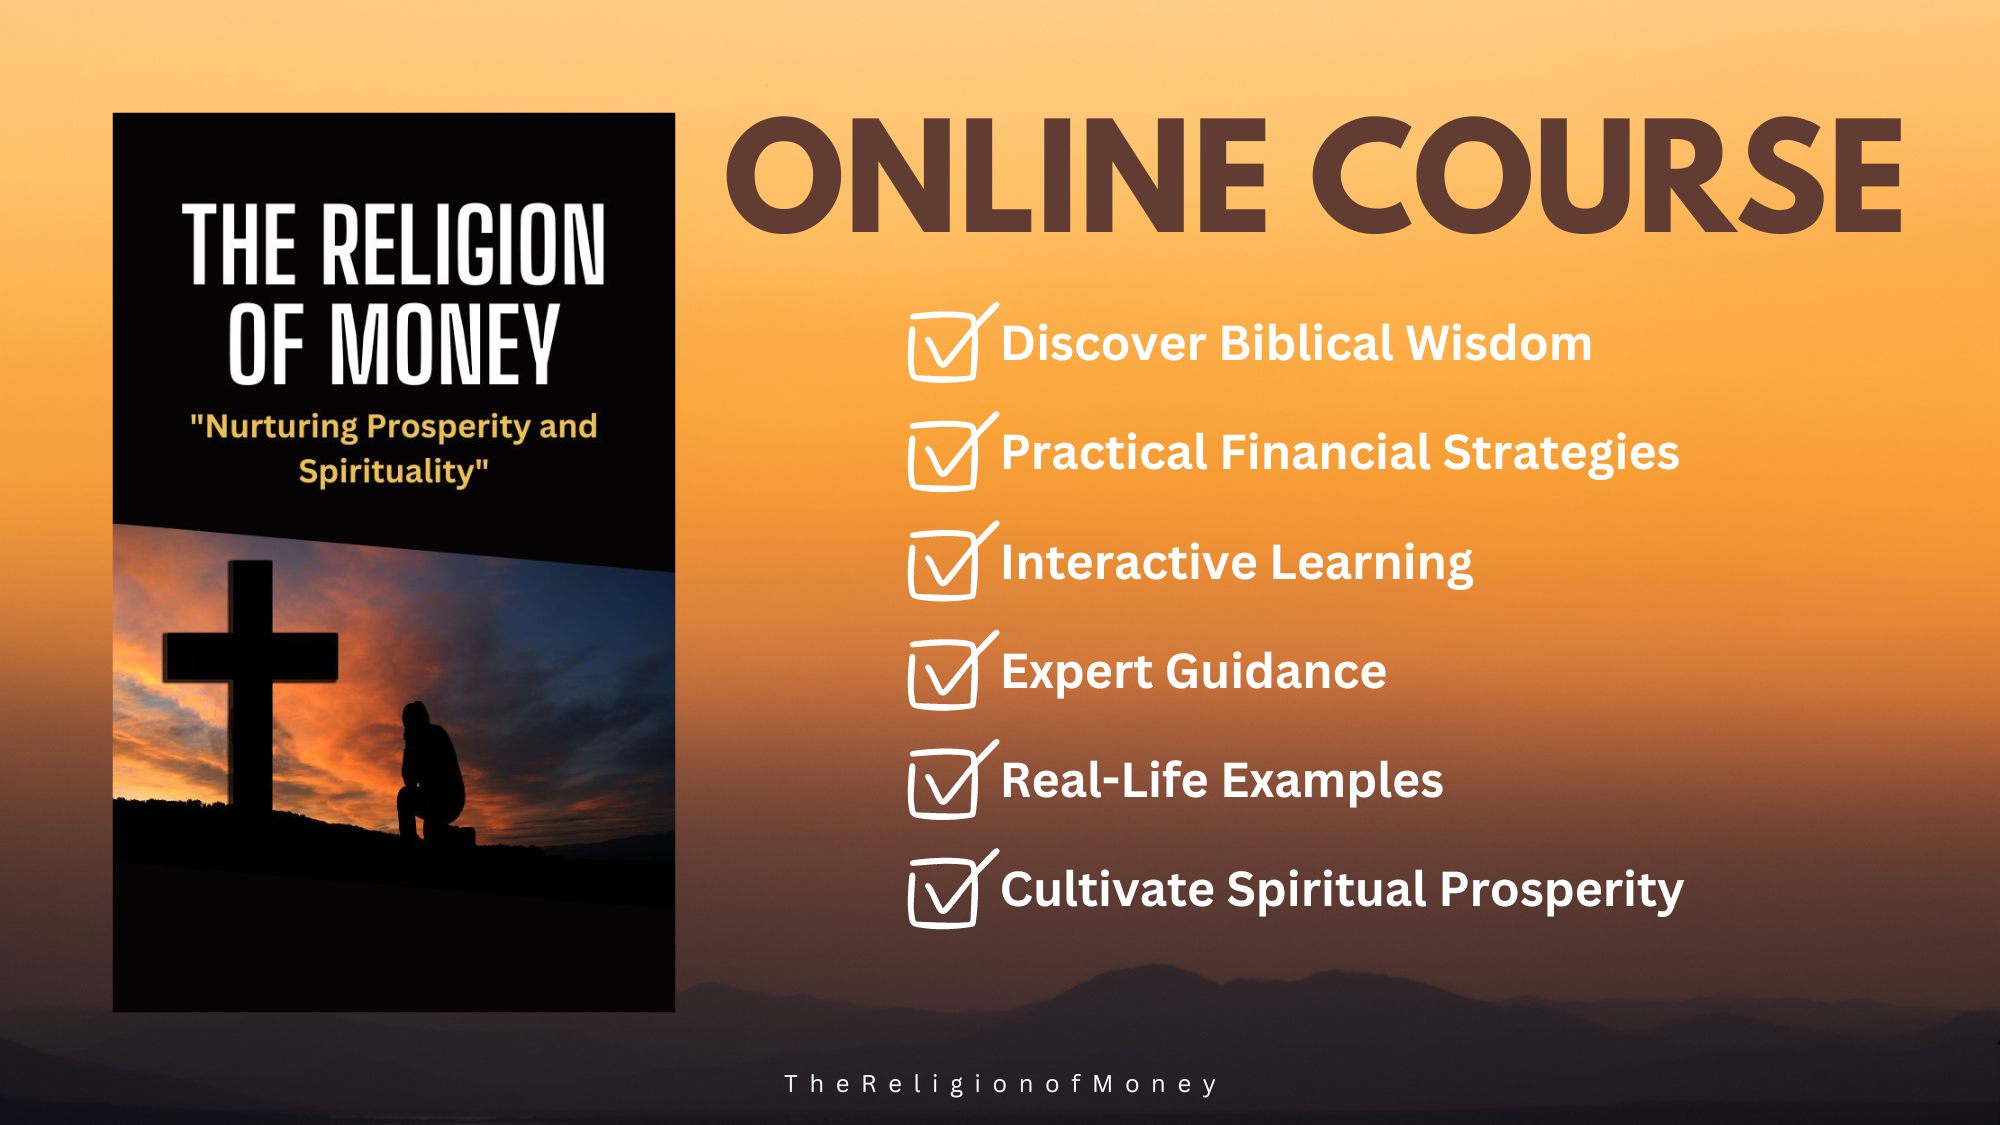 Nurturing Prosperity and Spirituality Online Course thank you (2000 × 1125 px)(1)